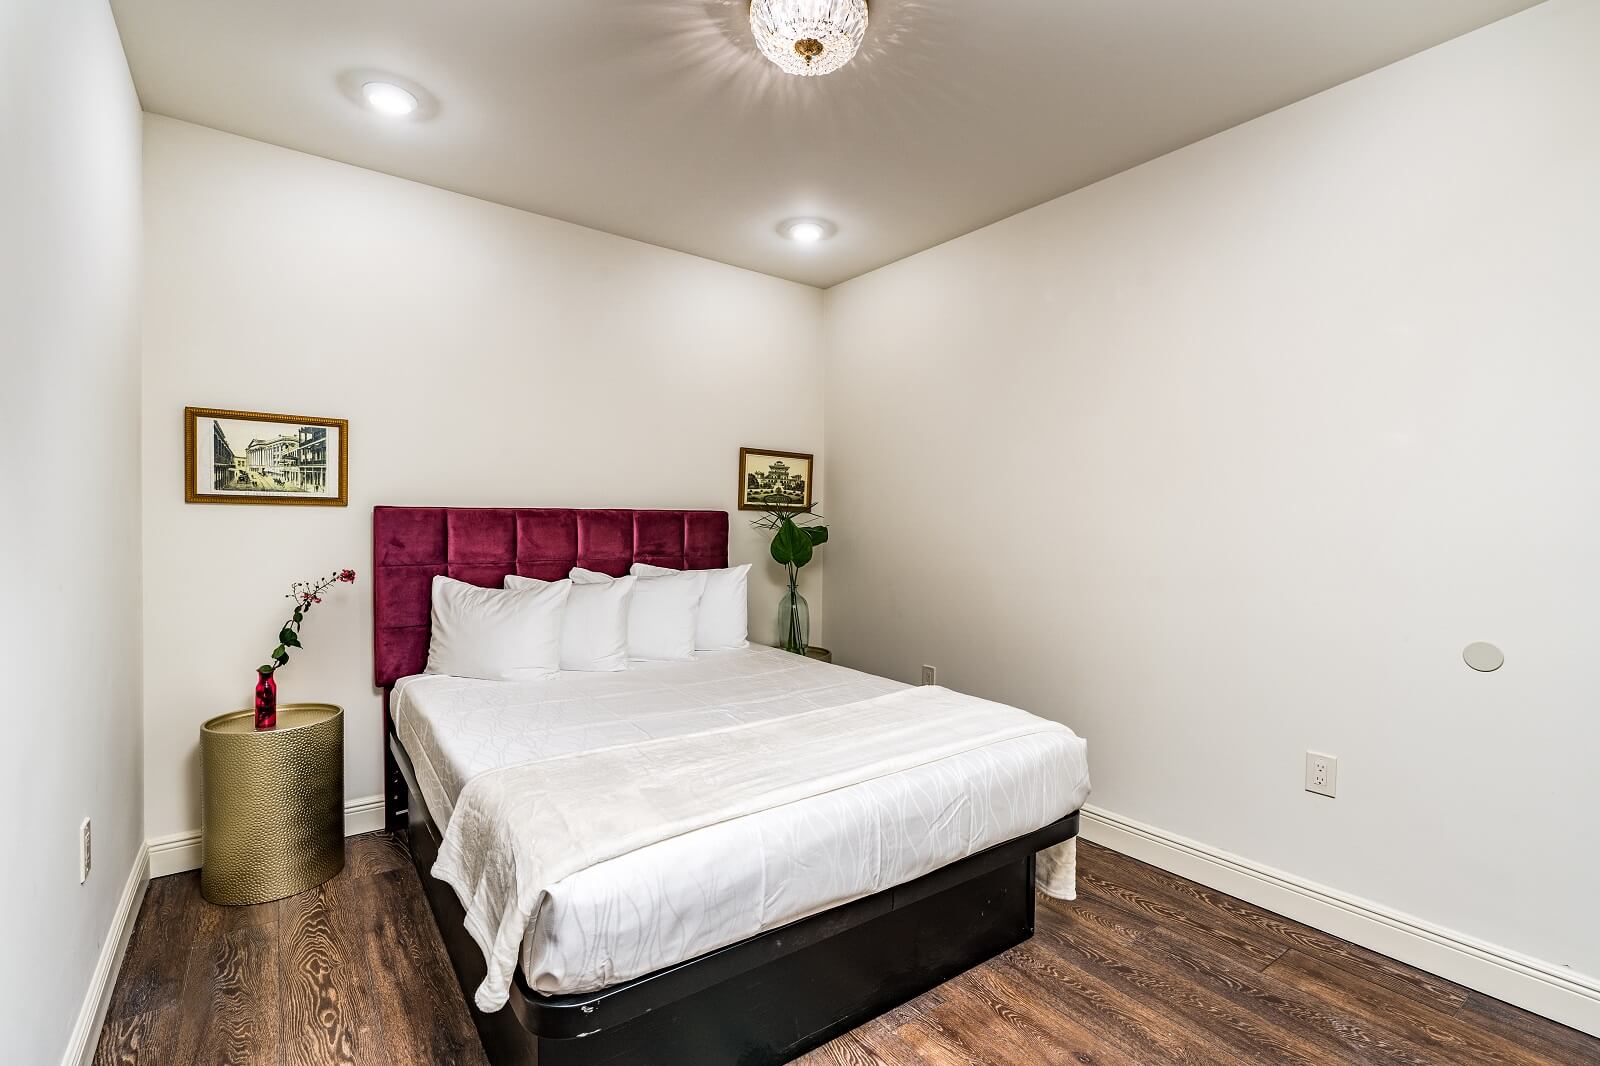 The Alexandre Unit 304 bedroom, a New Orleans luxury rental.